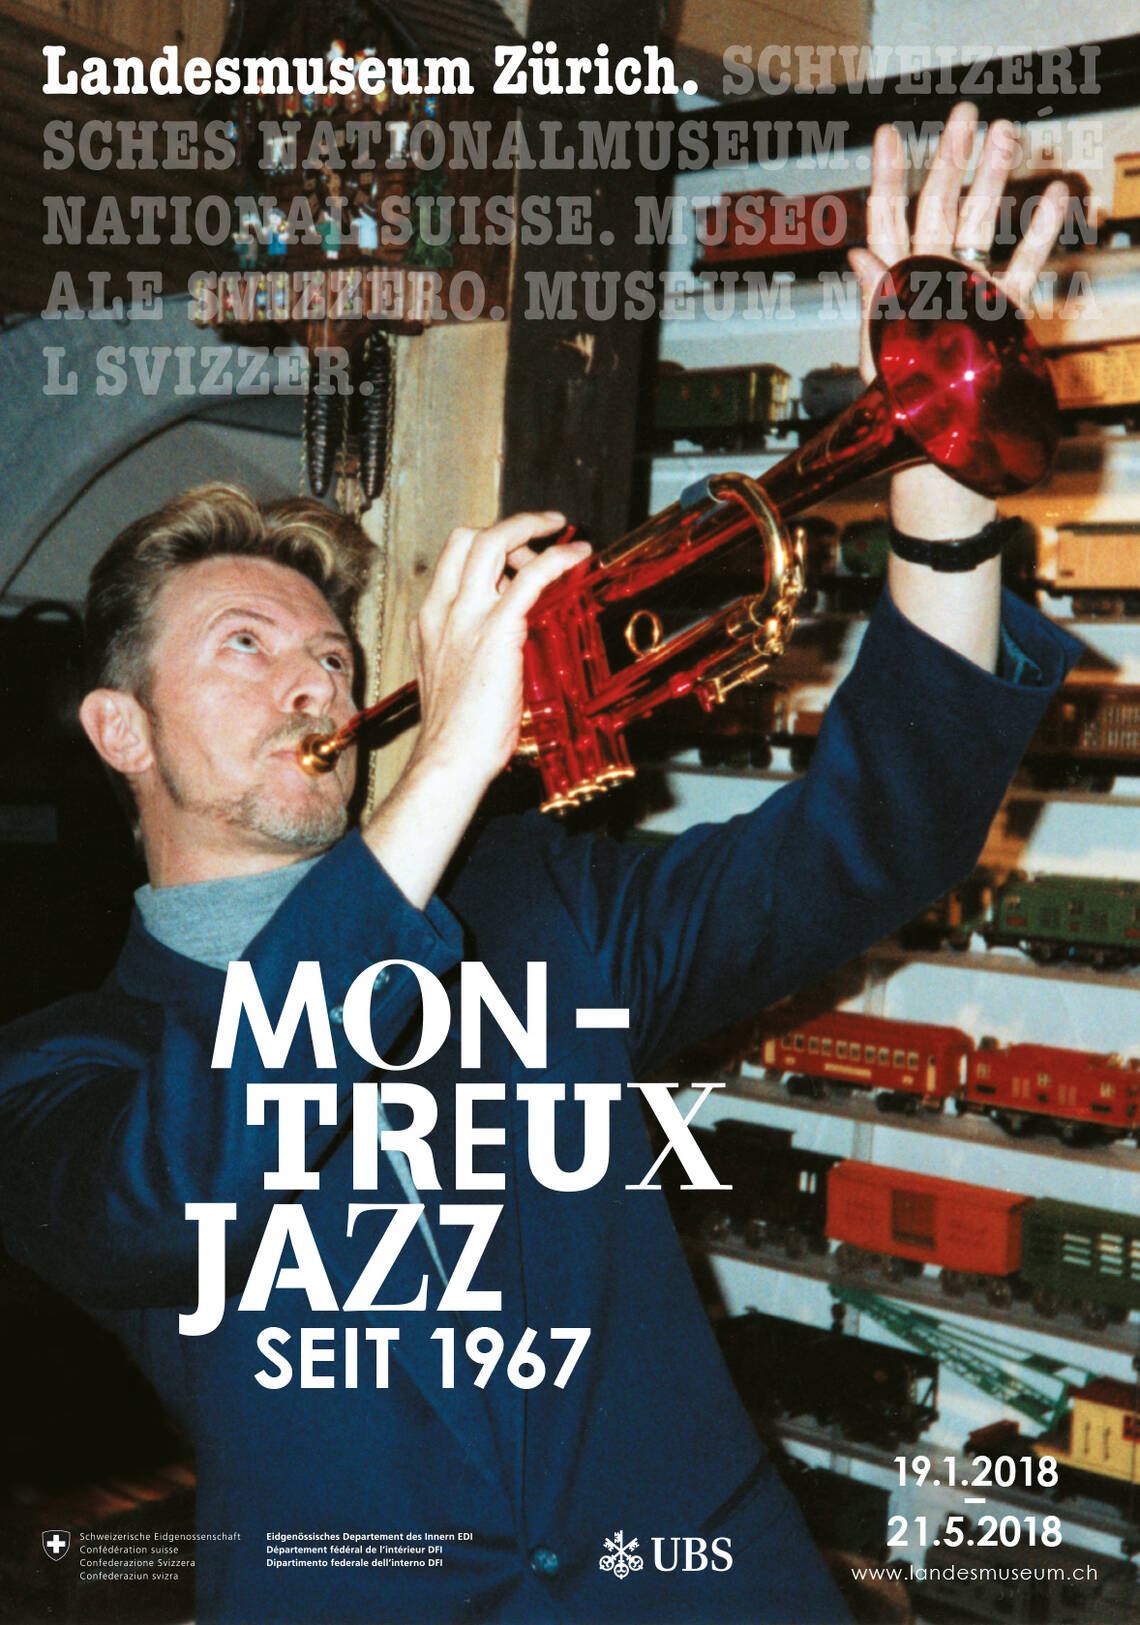 Poster of the exhibition "Montreux Jazz